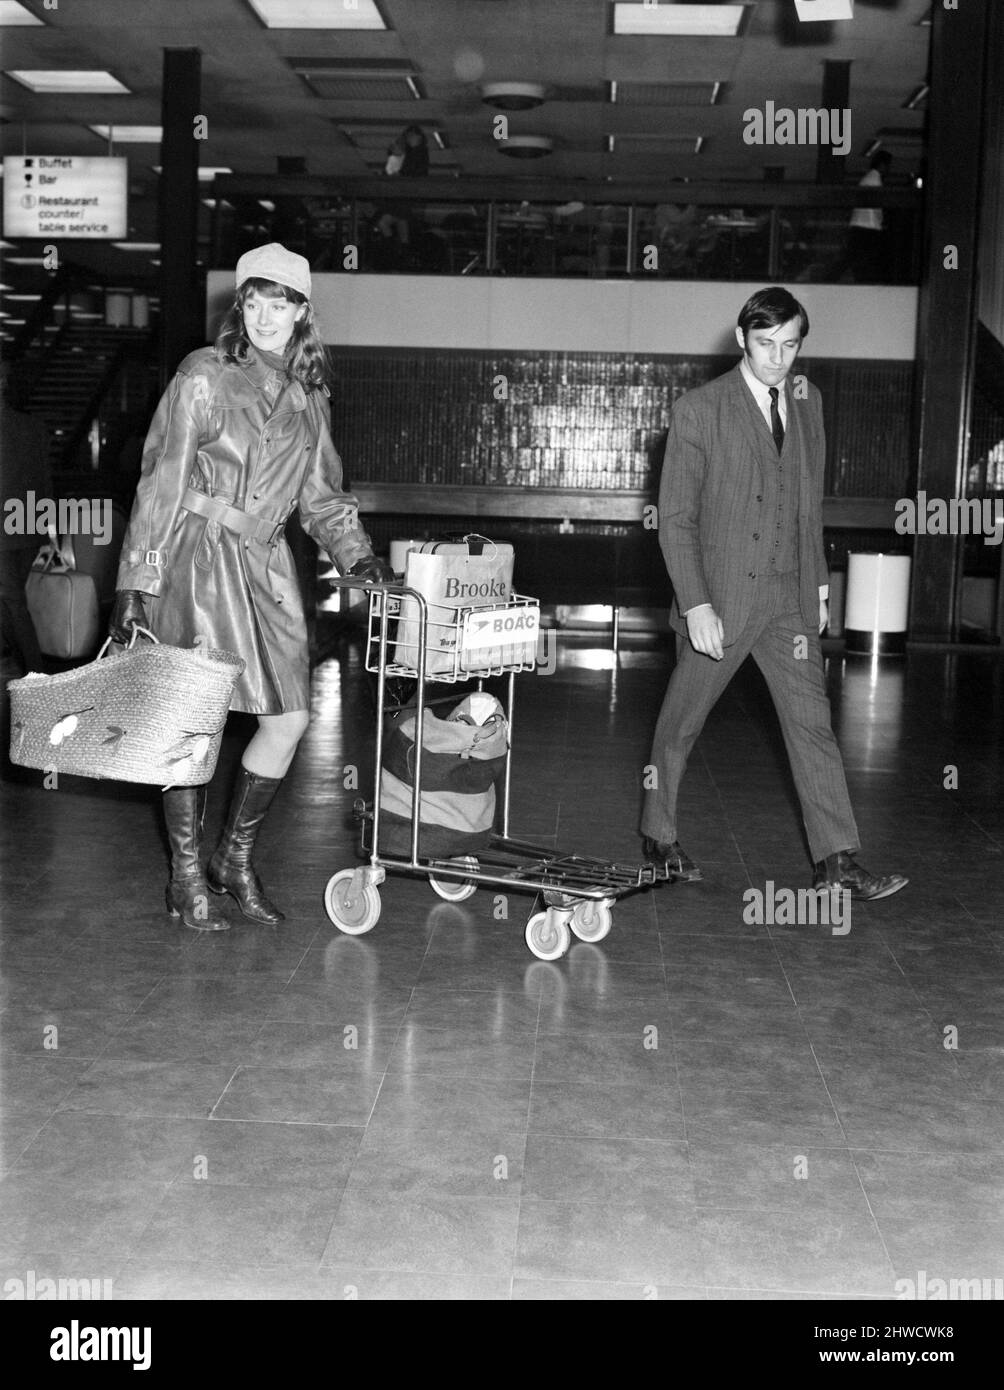 Entertainment. Film. Actress Vanessa Redgrave left Heathrow Airport  to fly to Madrid to be with her son's father Franco Nero. She was carrying her baby Carlo in what looked like a large raffia shopping basket. Vanessa Redgrave wearing all-leather clothes, with her baby Carlo in the large basket at Heathrow. November 1969 Z11252-002 Stock Photo